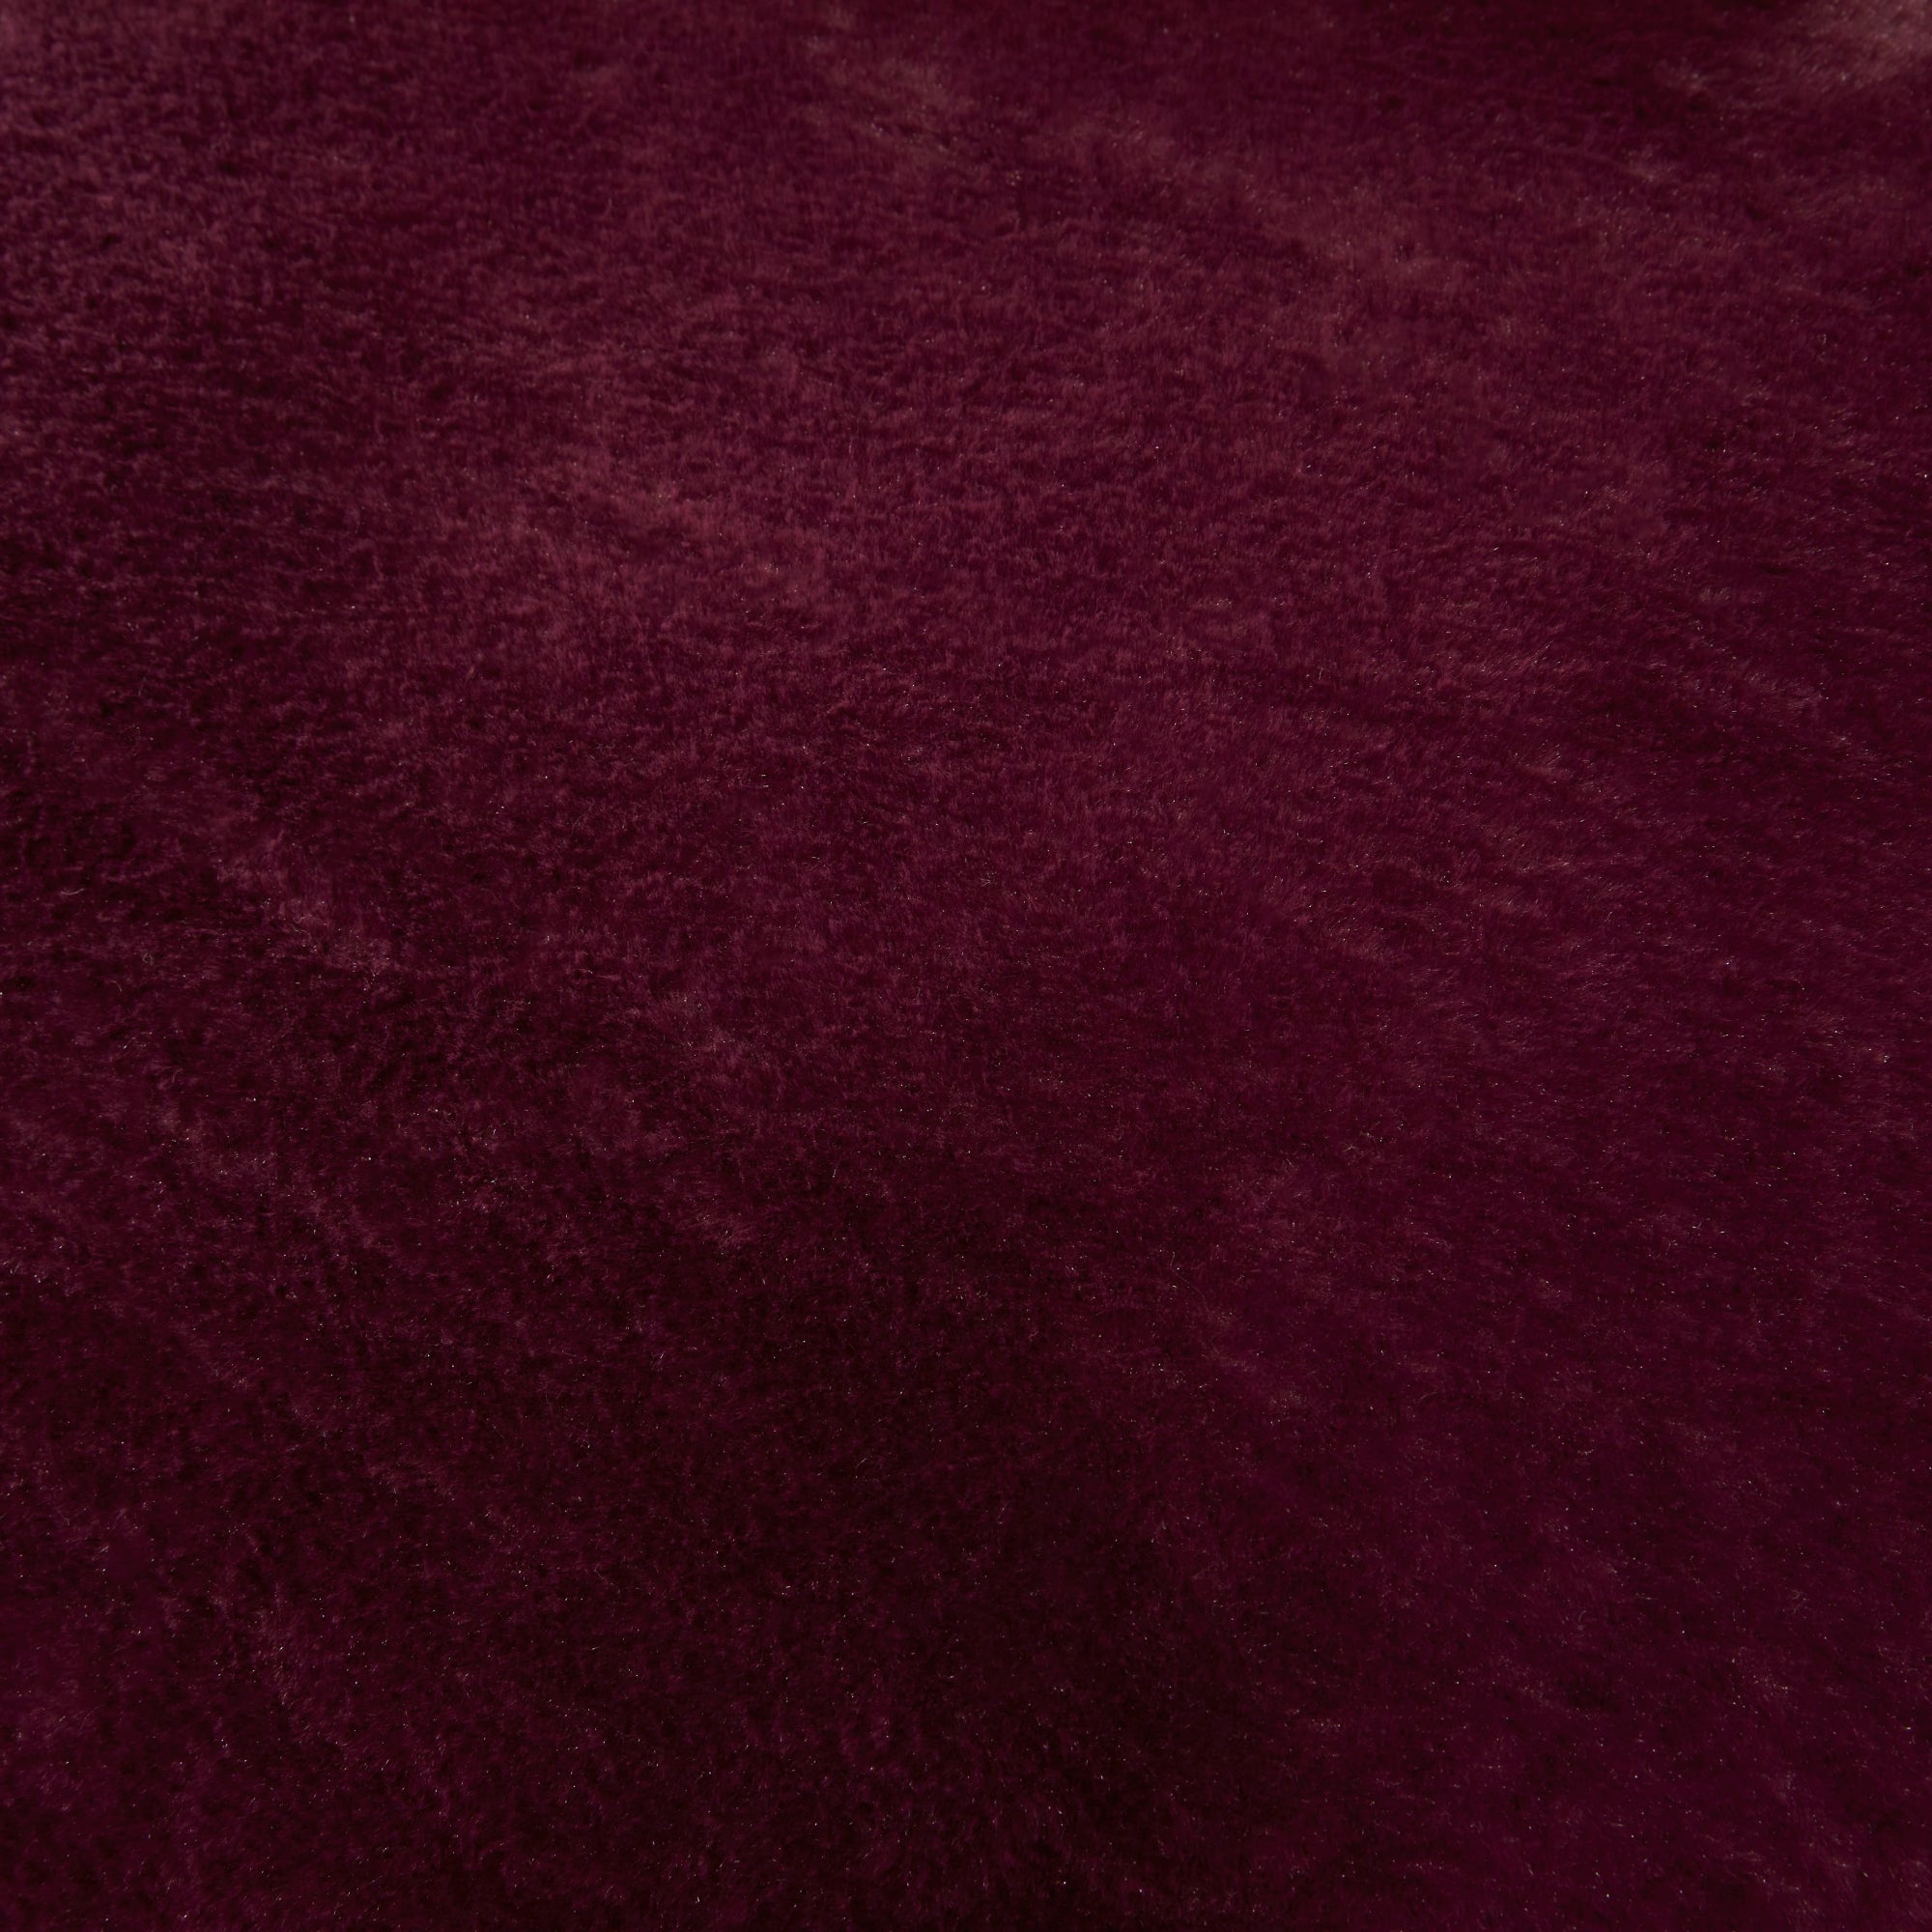 Bedspread Lucie by Soiree in Damson